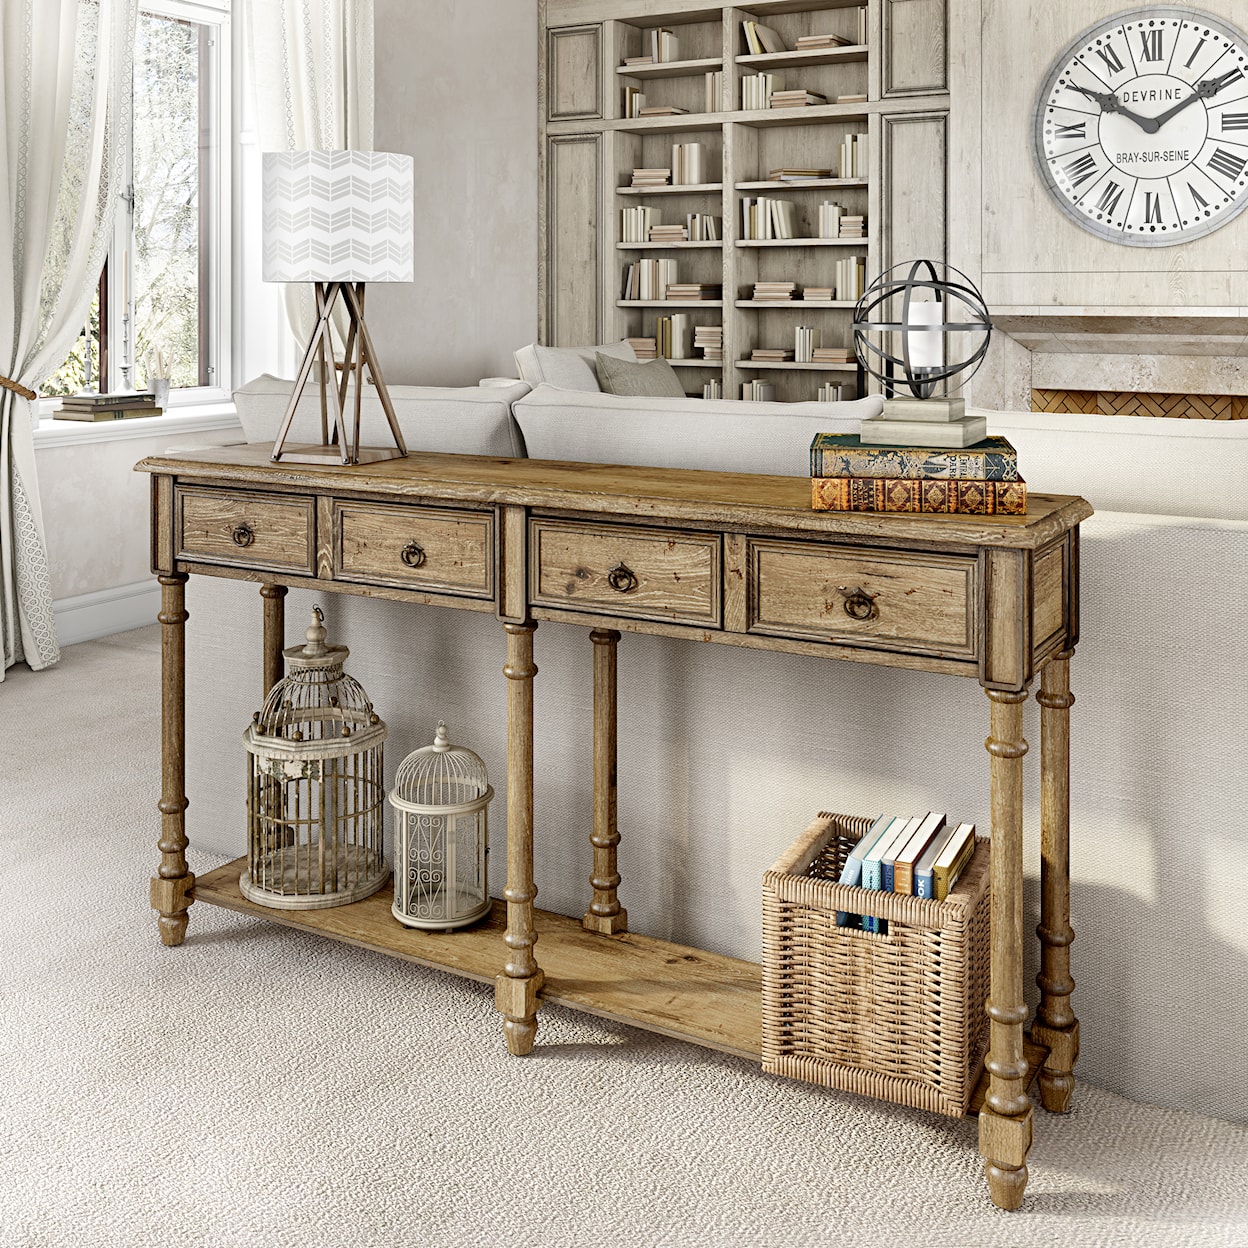 Accentrics Home Accents Hall Console Table